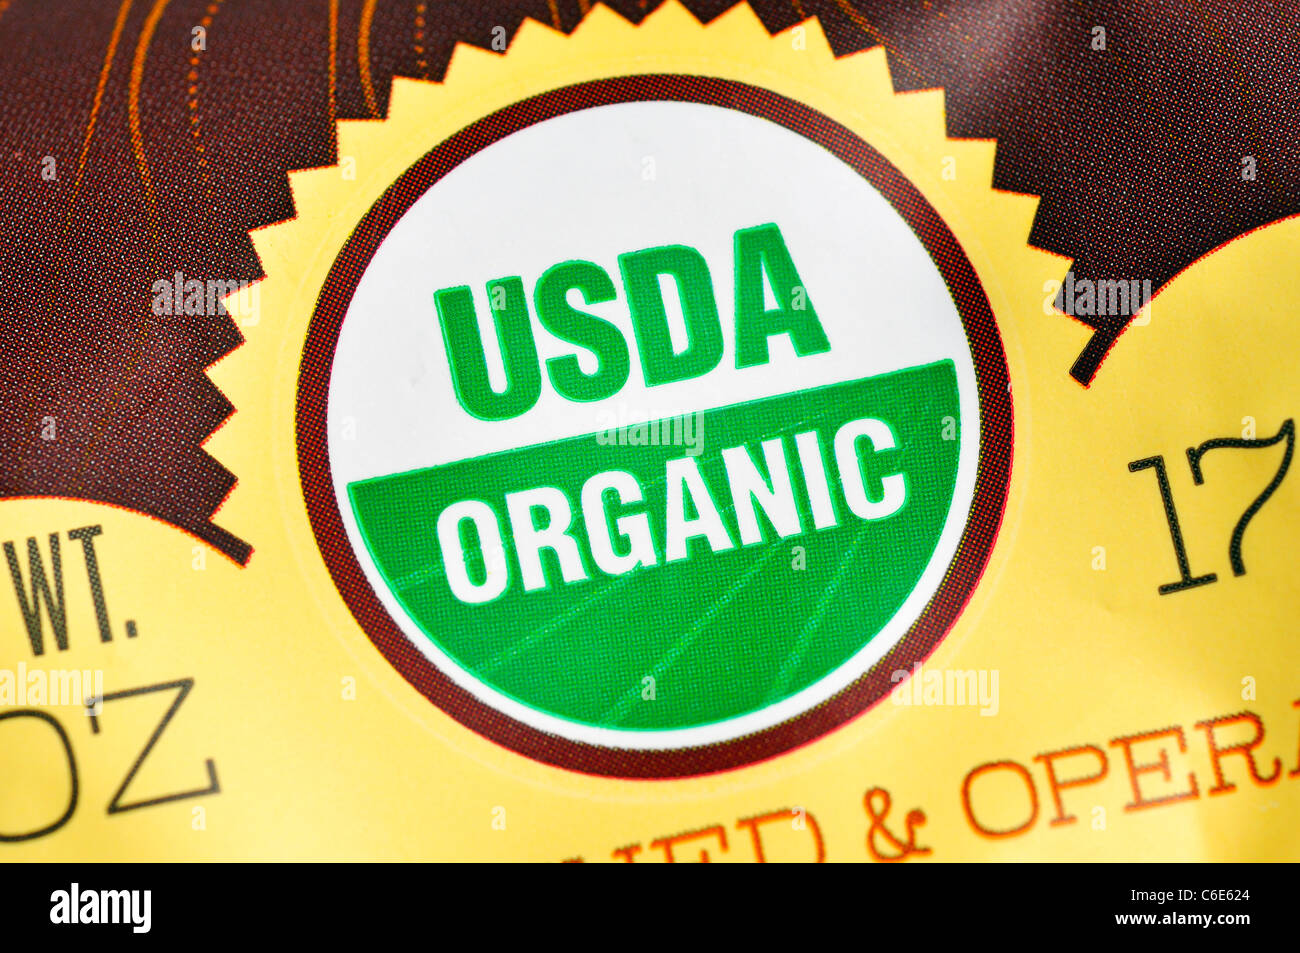 USDA organic label on food package Stock Photo